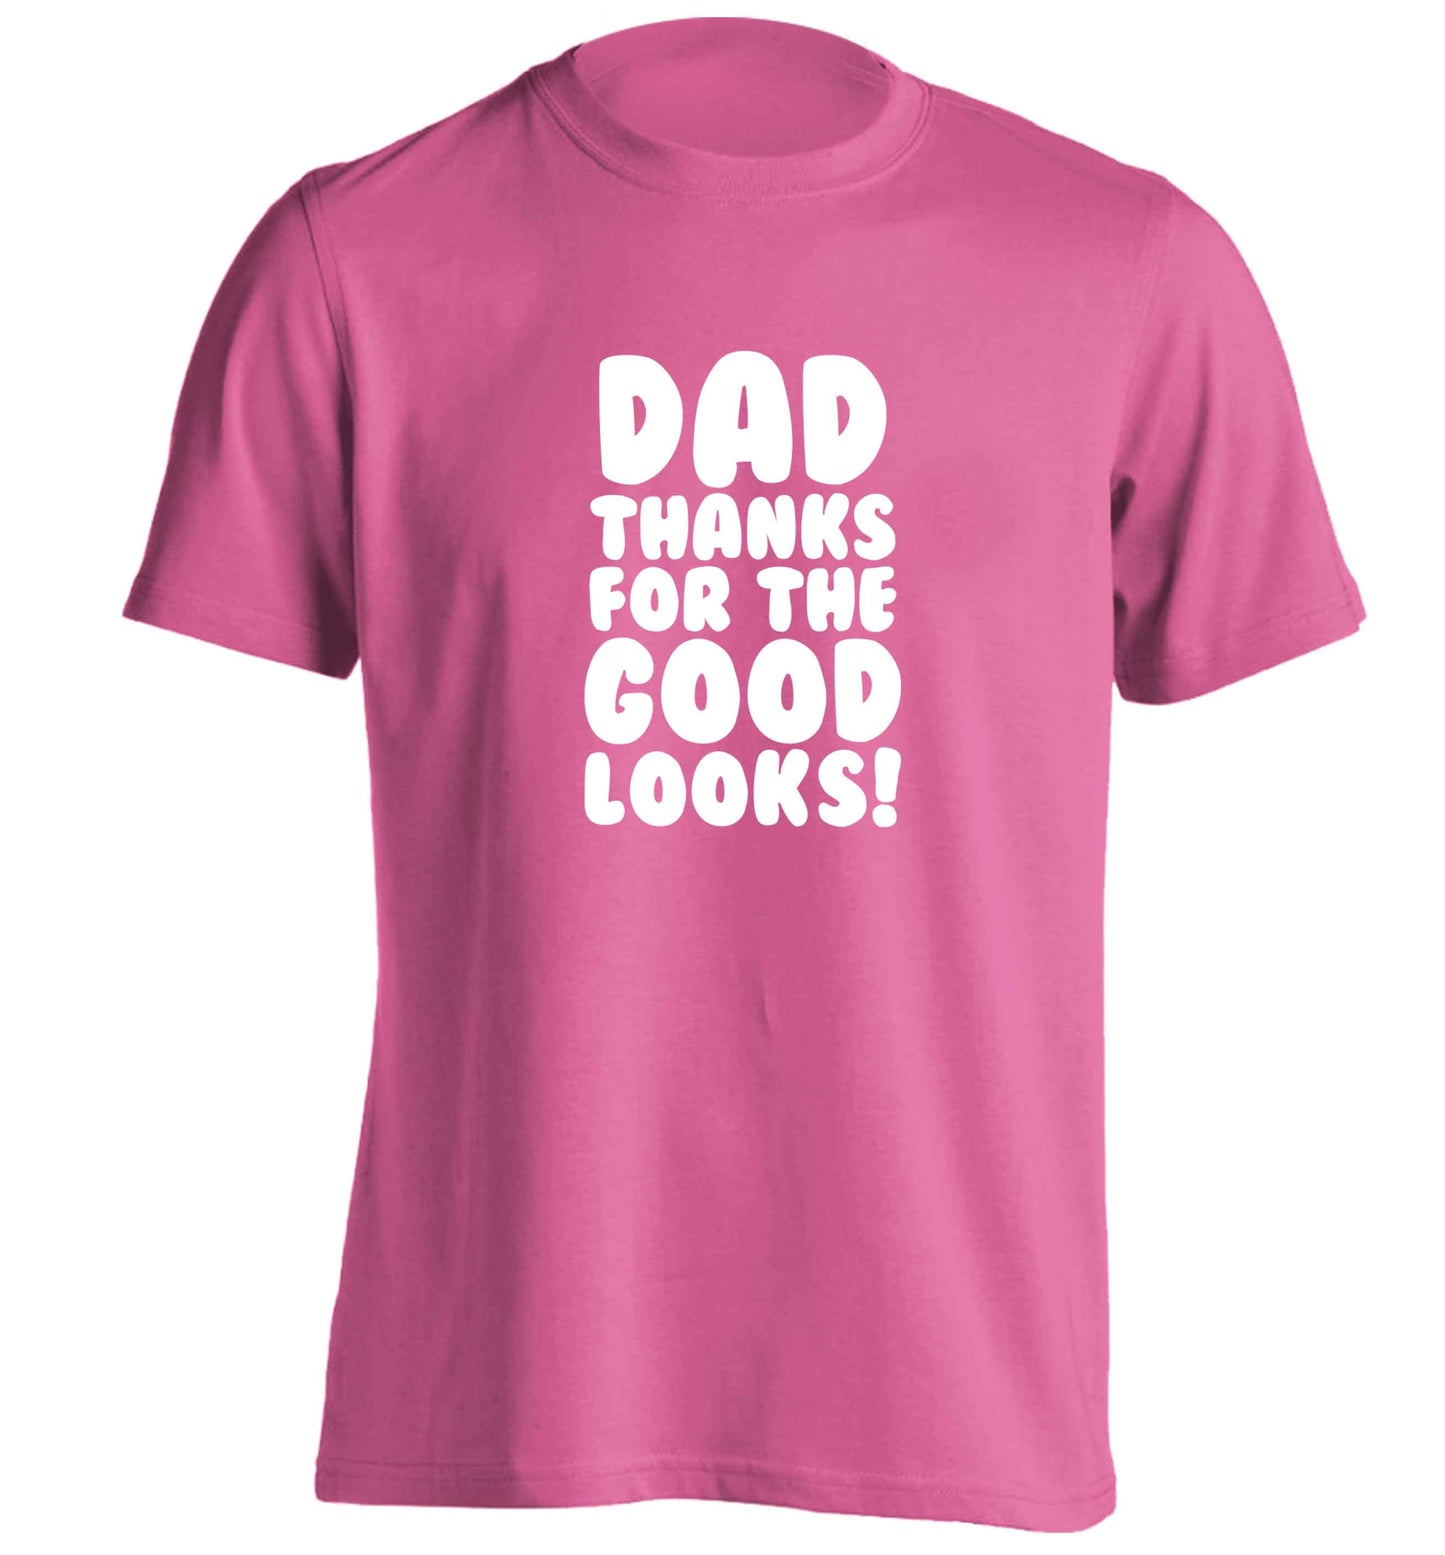 Dad thanks for the good looks adults unisex pink Tshirt 2XL